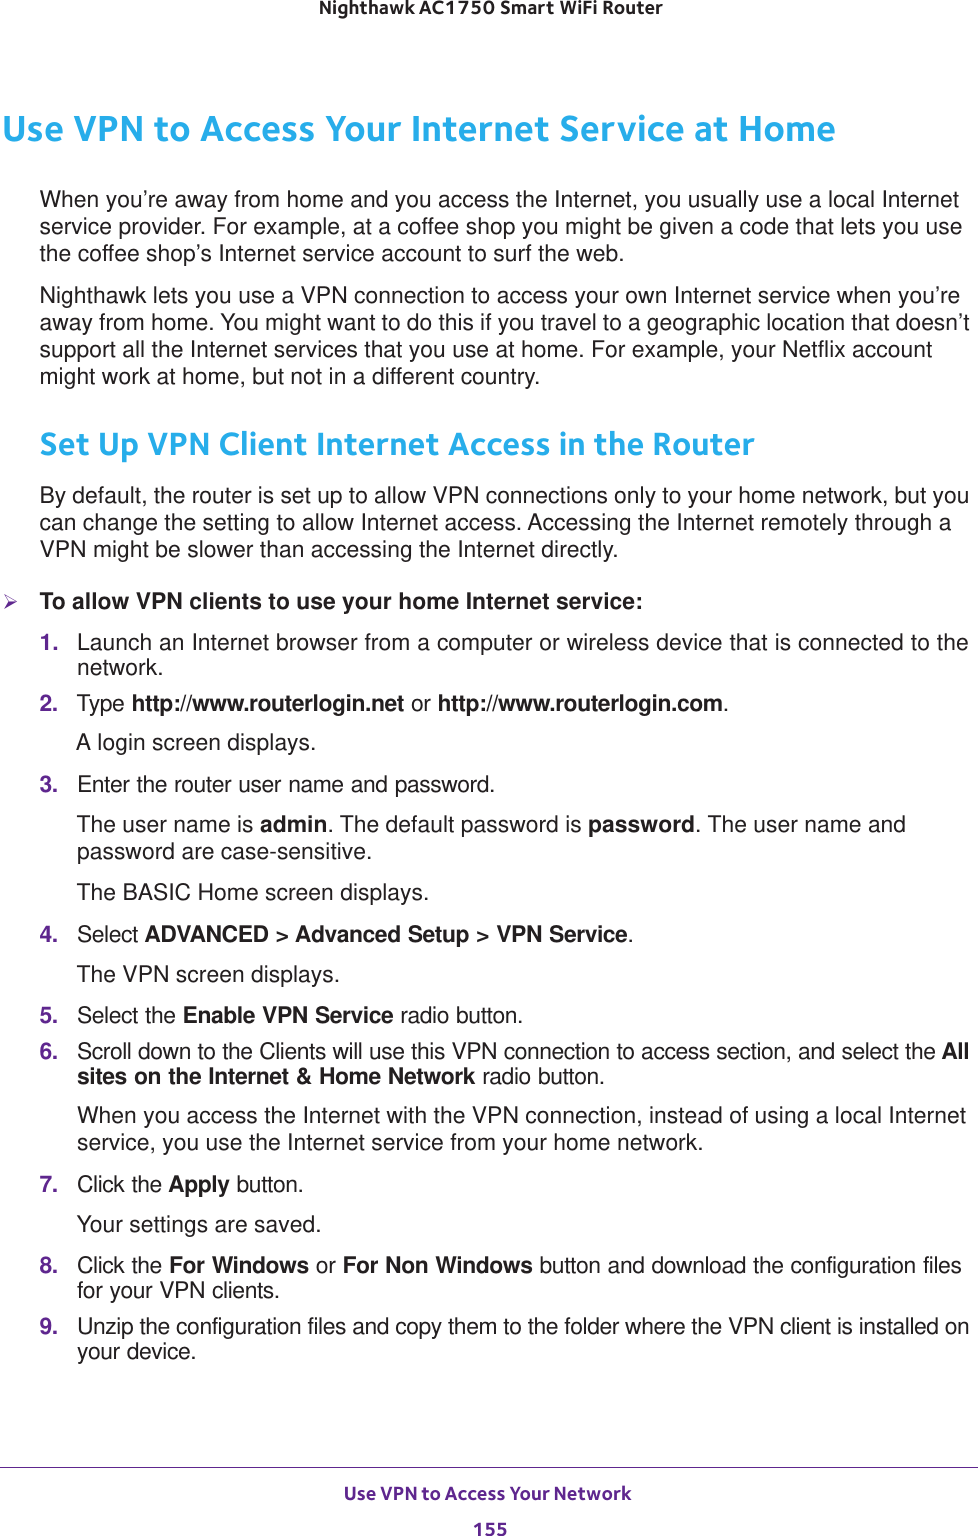 Use VPN to Access Your Network 155 Nighthawk AC1750 Smart WiFi RouterUse VPN to Access Your Internet Service at HomeWhen you’re away from home and you access the Internet, you usually use a local Internet service provider. For example, at a coffee shop you might be given a code that lets you use the coffee shop’s Internet service account to surf the web.Nighthawk lets you use a VPN connection to access your own Internet service when you’re away from home. You might want to do this if you travel to a geographic location that doesn’t support all the Internet services that you use at home. For example, your Netflix account might work at home, but not in a different country. Set Up VPN Client Internet Access in the RouterBy default, the router is set up to allow VPN connections only to your home network, but you can change the setting to allow Internet access. Accessing the Internet remotely through a VPN might be slower than accessing the Internet directly.To allow VPN clients to use your home Internet service:1.  Launch an Internet browser from a computer or wireless device that is connected to the network.2.  Type http://www.routerlogin.net or http://www.routerlogin.com.A login screen displays.3.  Enter the router user name and password.The user name is admin. The default password is password. The user name and password are case-sensitive.The BASIC Home screen displays.4.  Select ADVANCED &gt; Advanced Setup &gt; VPN Service.The VPN screen displays.5.  Select the Enable VPN Service radio button.6.  Scroll down to the Clients will use this VPN connection to access section, and select the All sites on the Internet &amp; Home Network radio button. When you access the Internet with the VPN connection, instead of using a local Internet service, you use the Internet service from your home network.7.  Click the Apply button.Your settings are saved.8.  Click the For Windows or For Non Windows button and download the configuration files for your VPN clients.9.  Unzip the configuration files and copy them to the folder where the VPN client is installed on your device. 